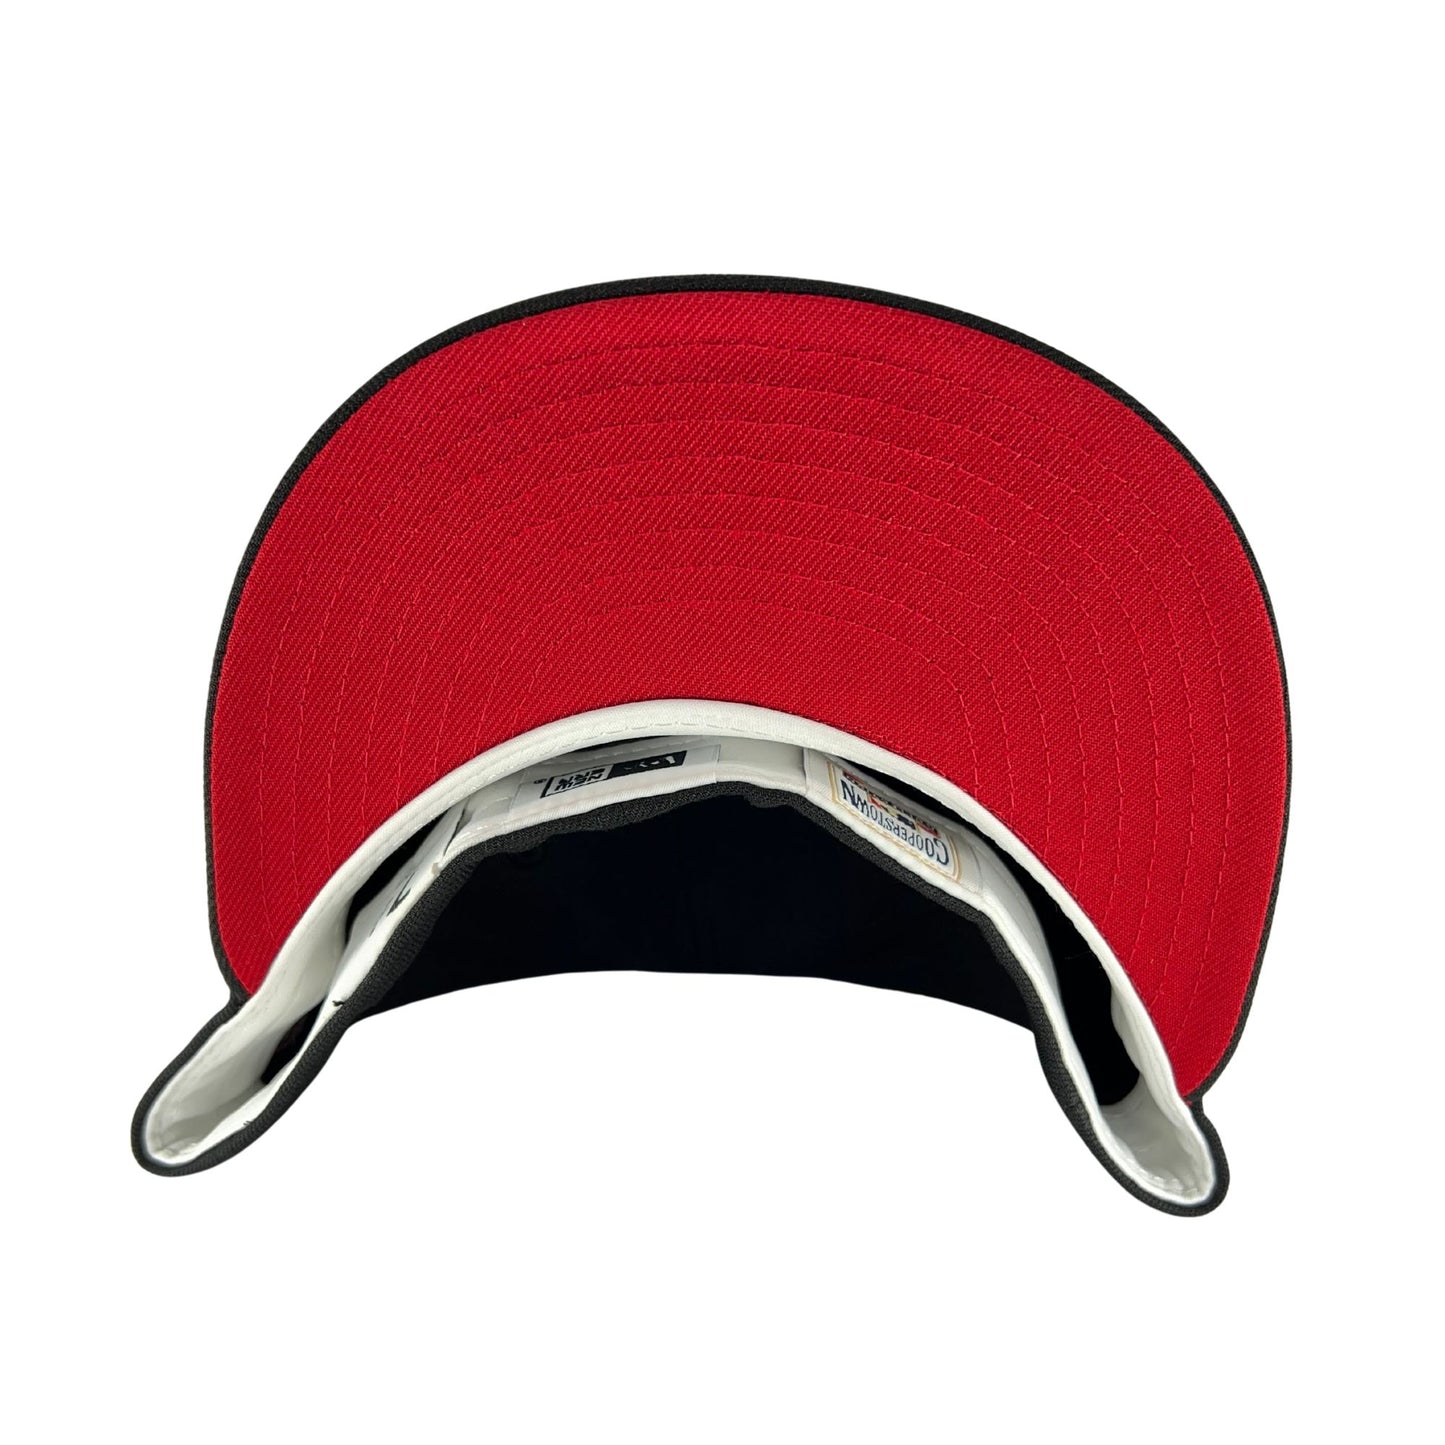 Chicago White Sox Black/Red/Red UV New Era 59FIFTY Fitted Hat